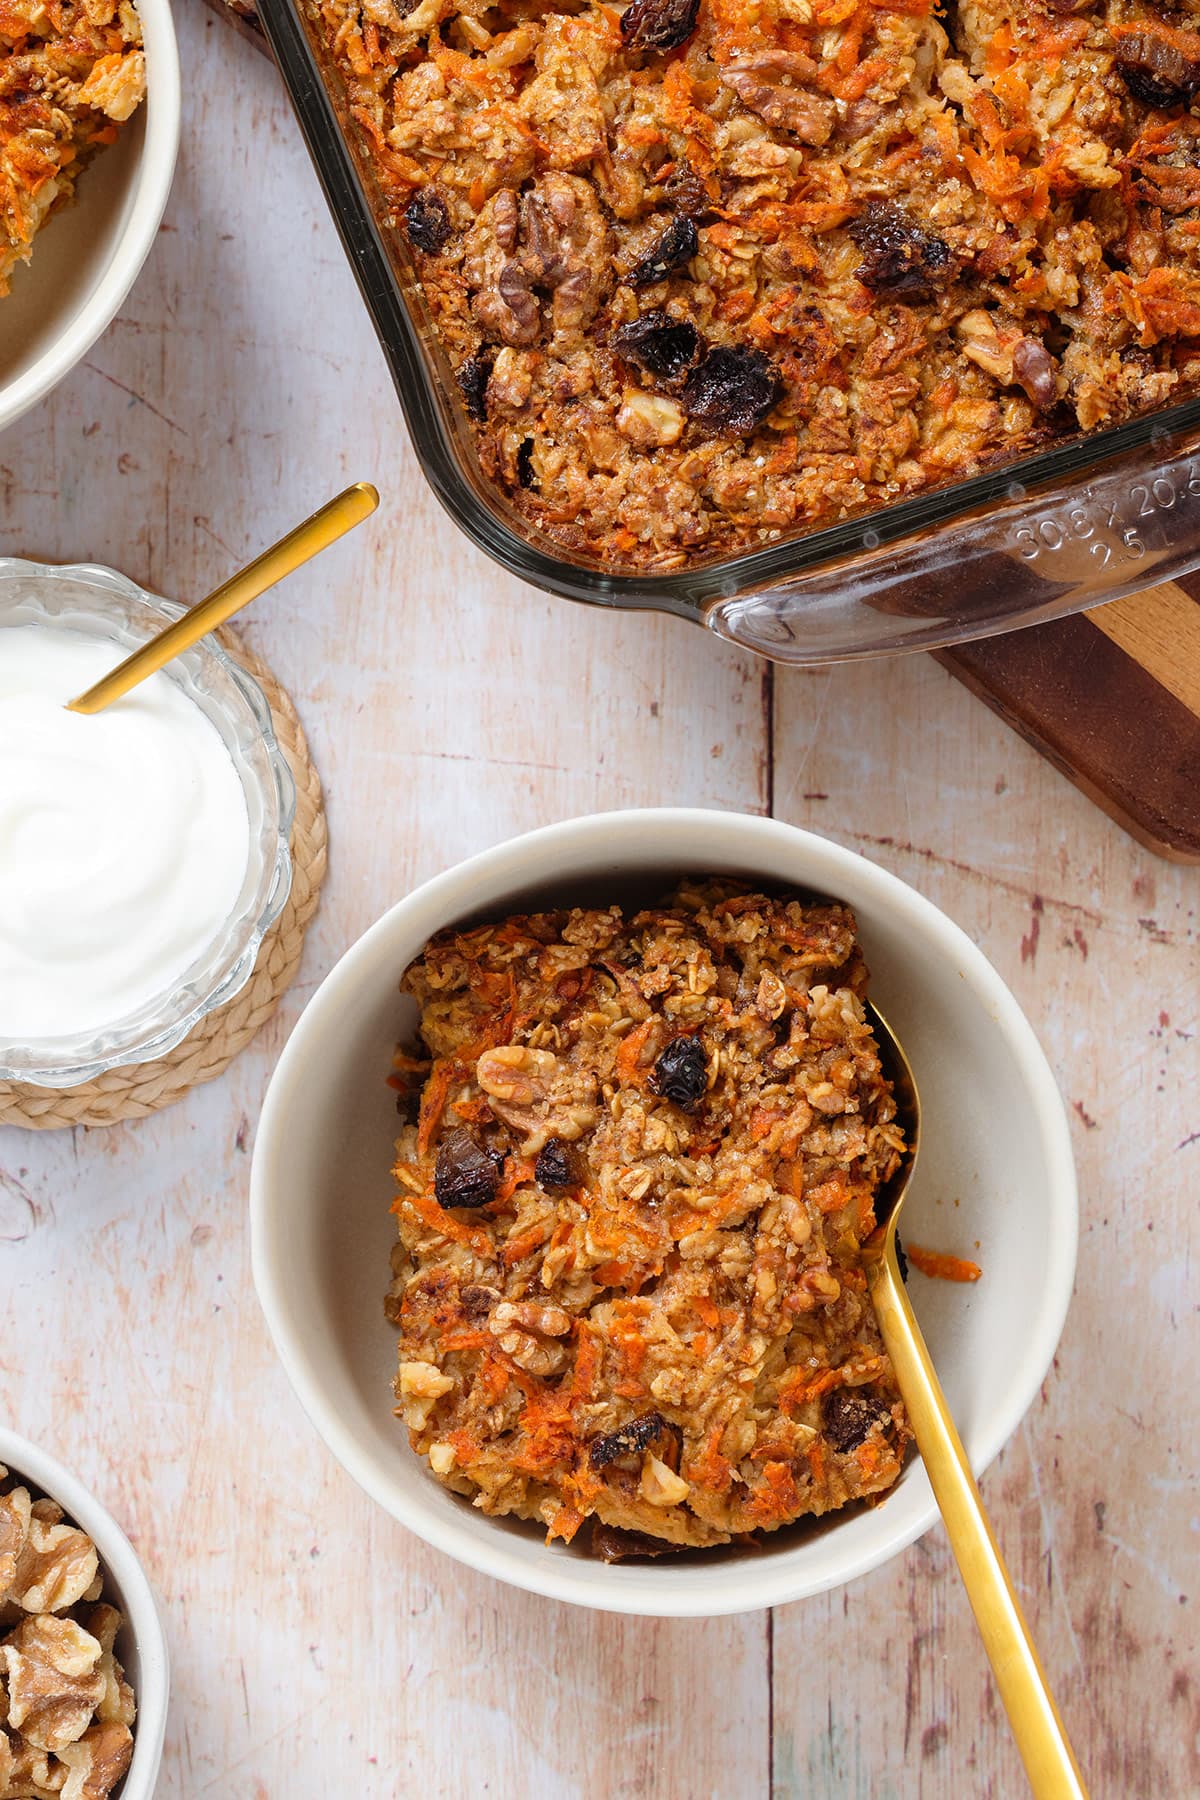 A slice of carrot cake baked oatmeal in a white bowl with a gold spoon on a wooden background.